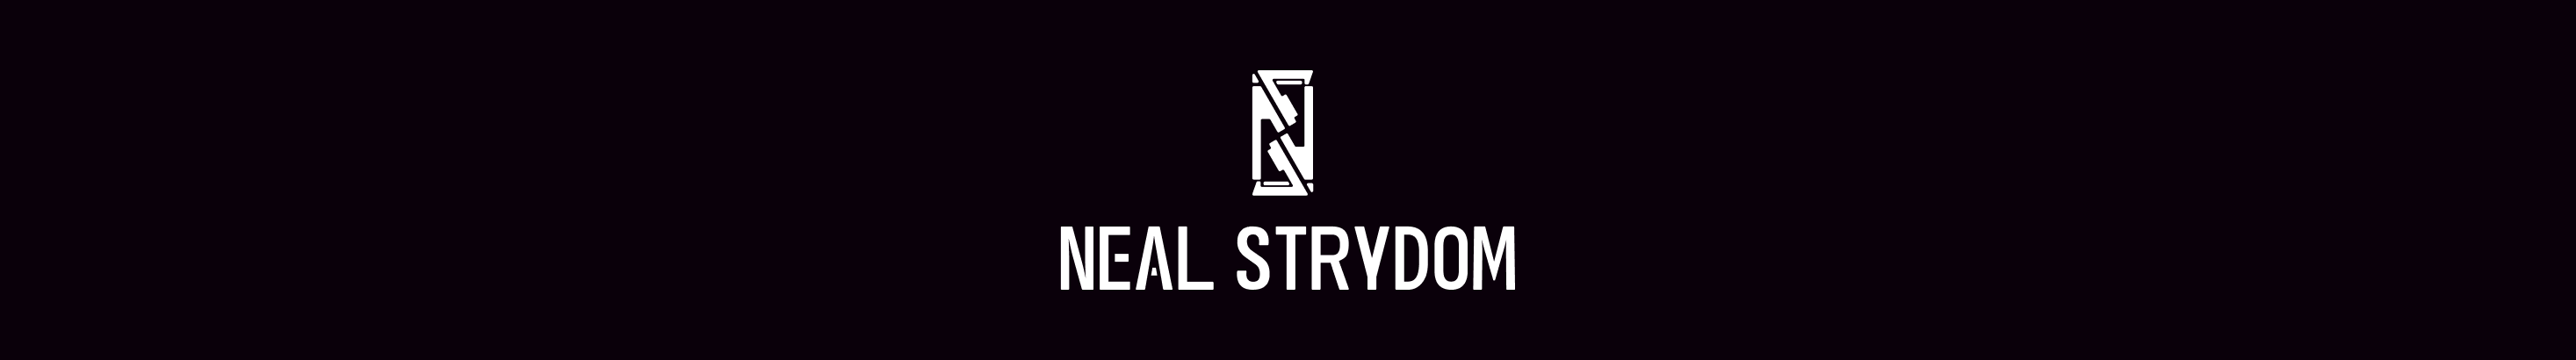 Neal Strydom's profile banner